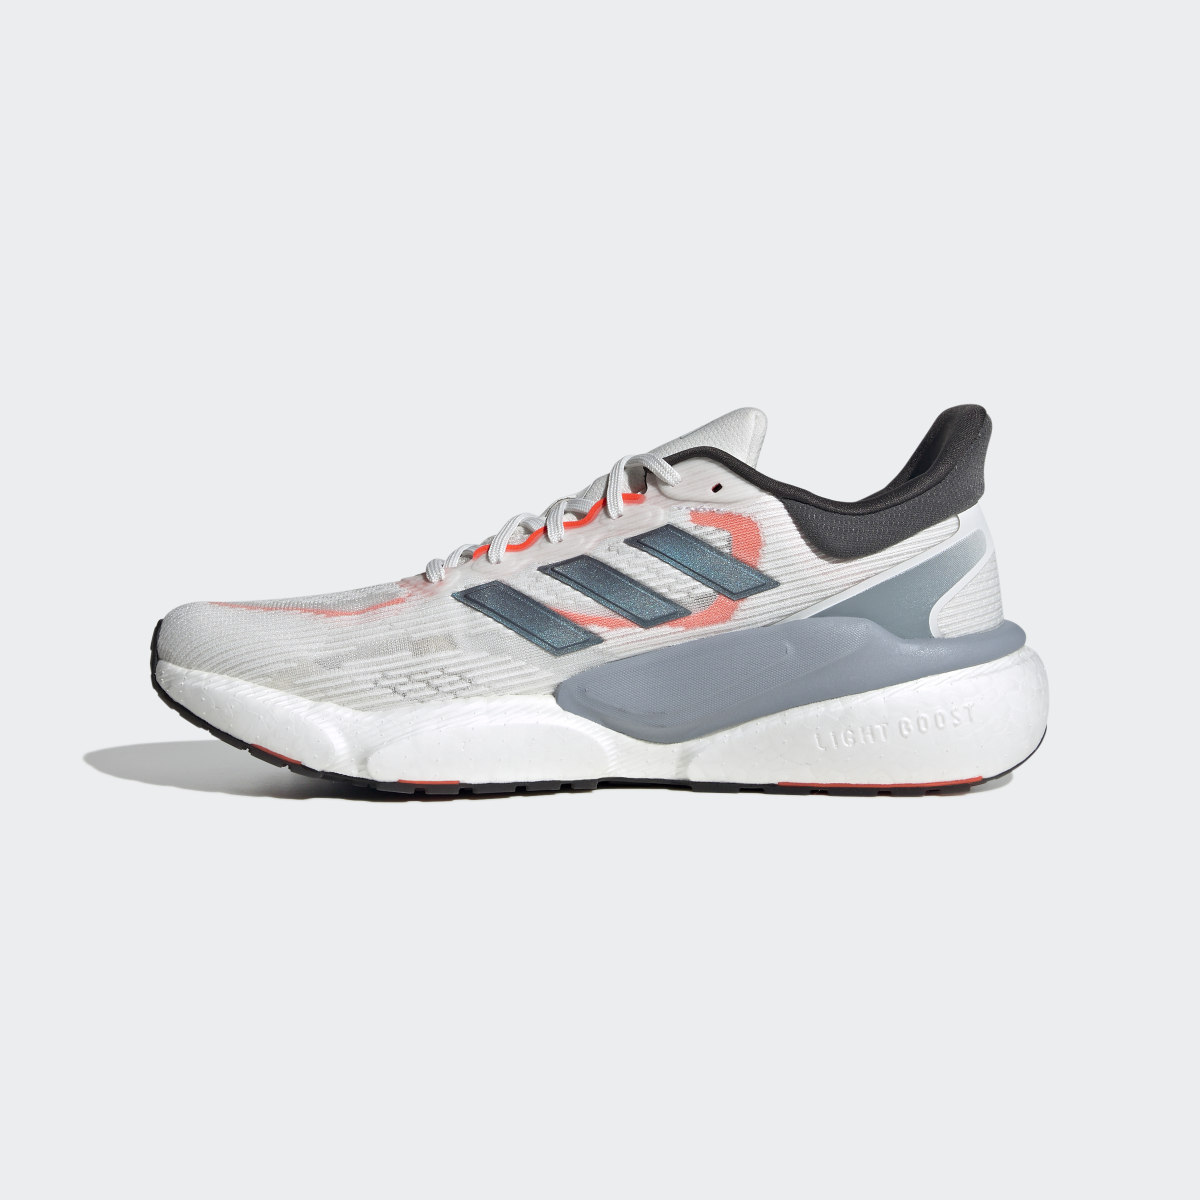 Adidas Solarboost 5 Shoes. 10